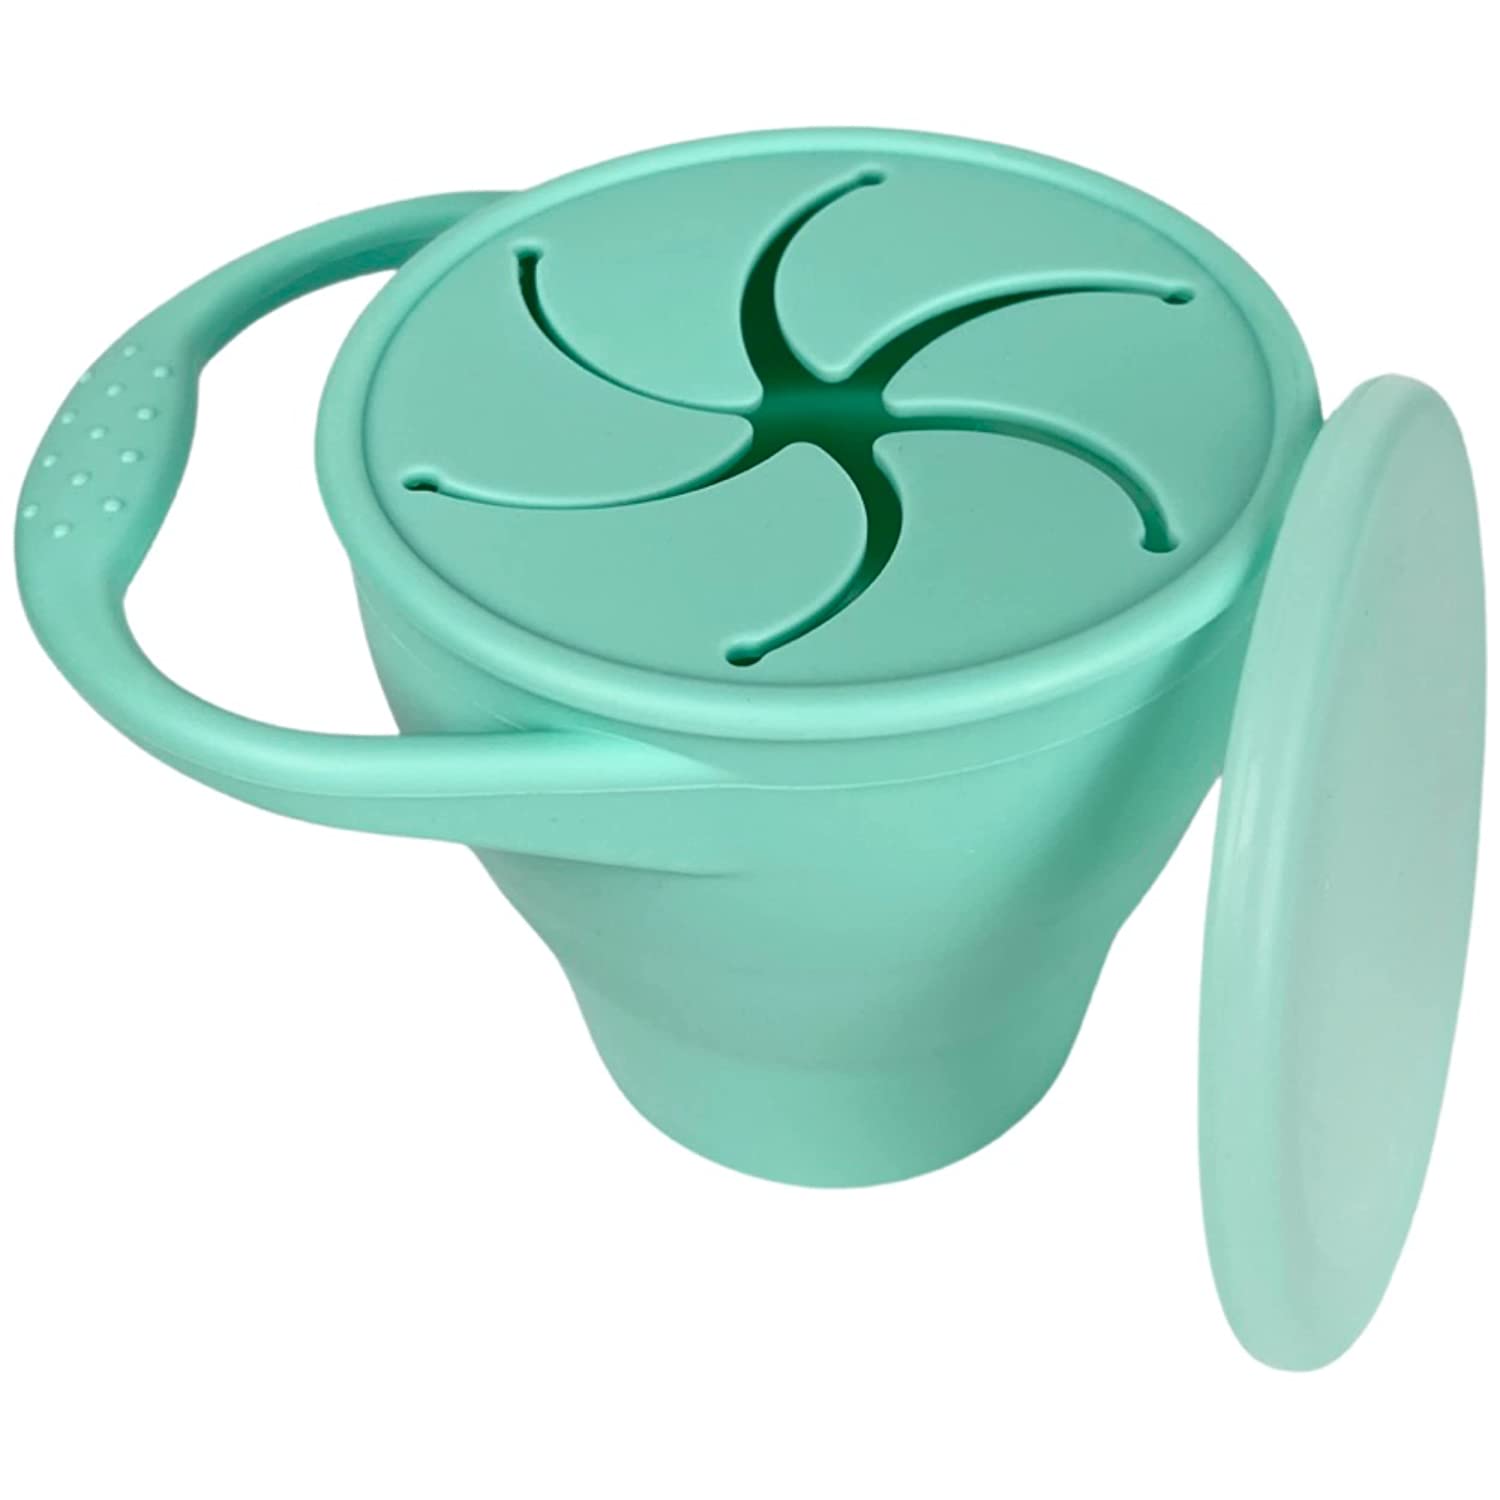 Best Snack Cups